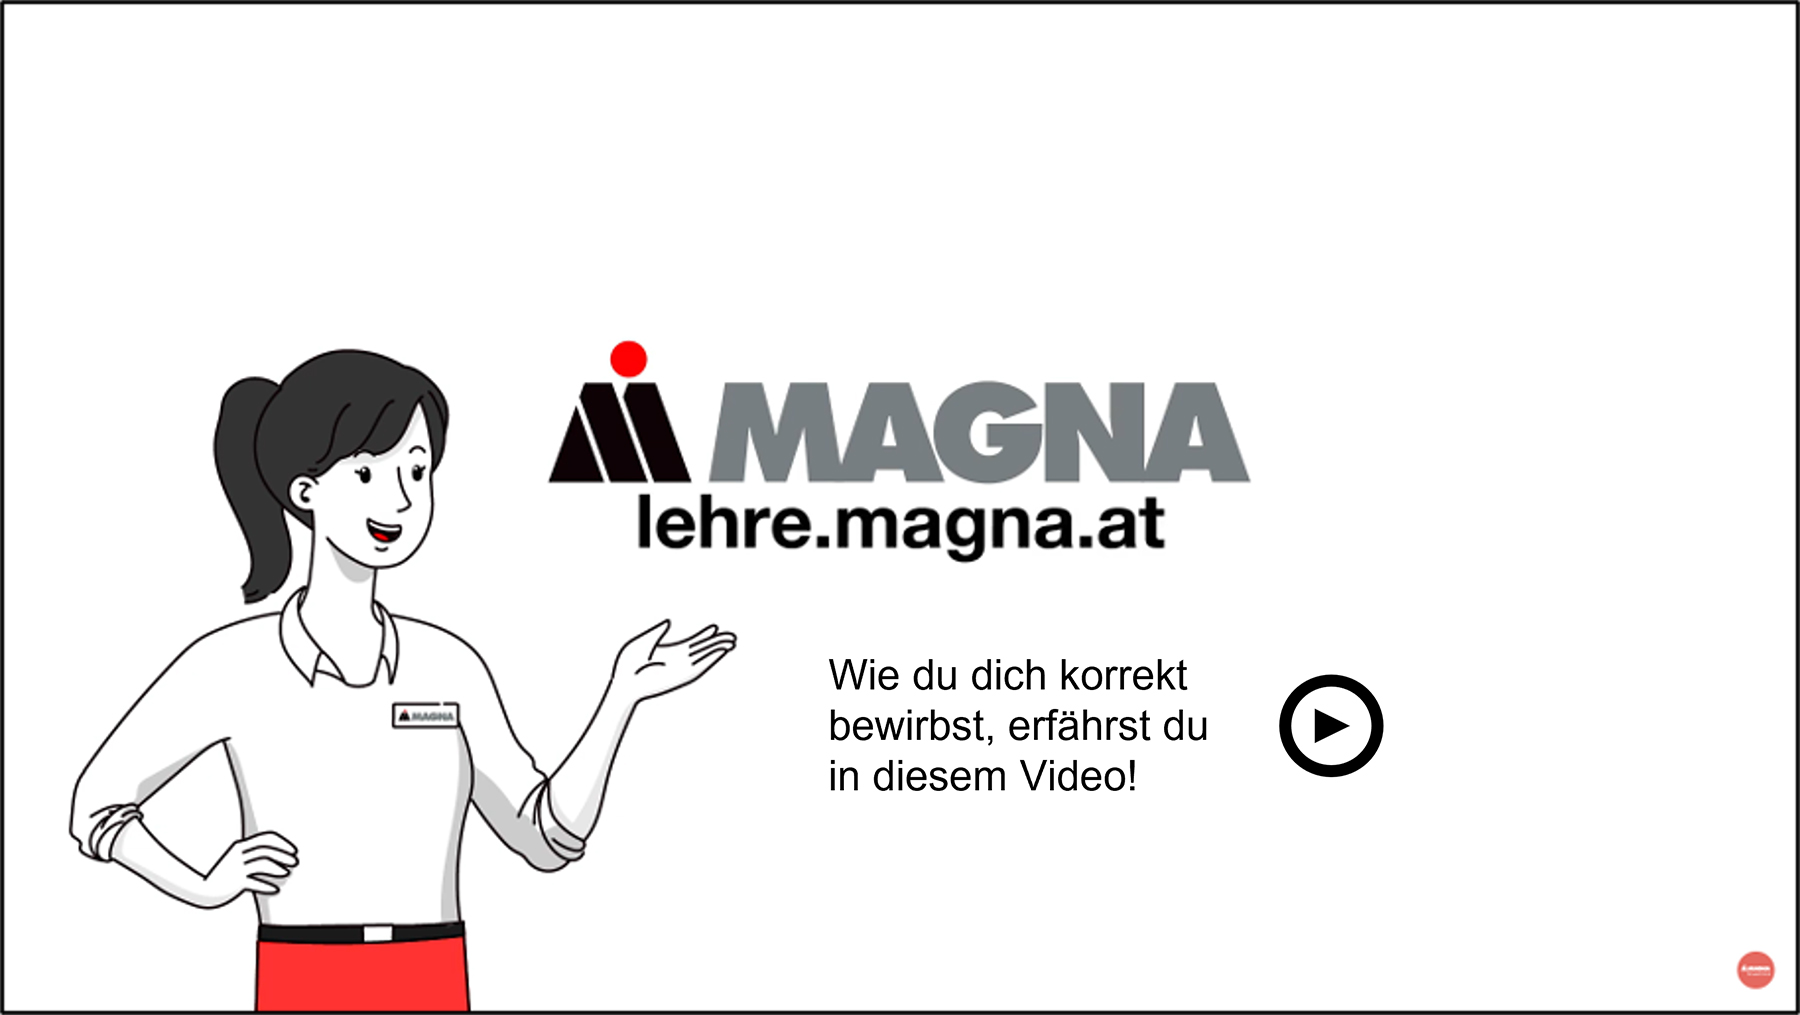 Cartoon person with Magna logo and lehre.magna.at